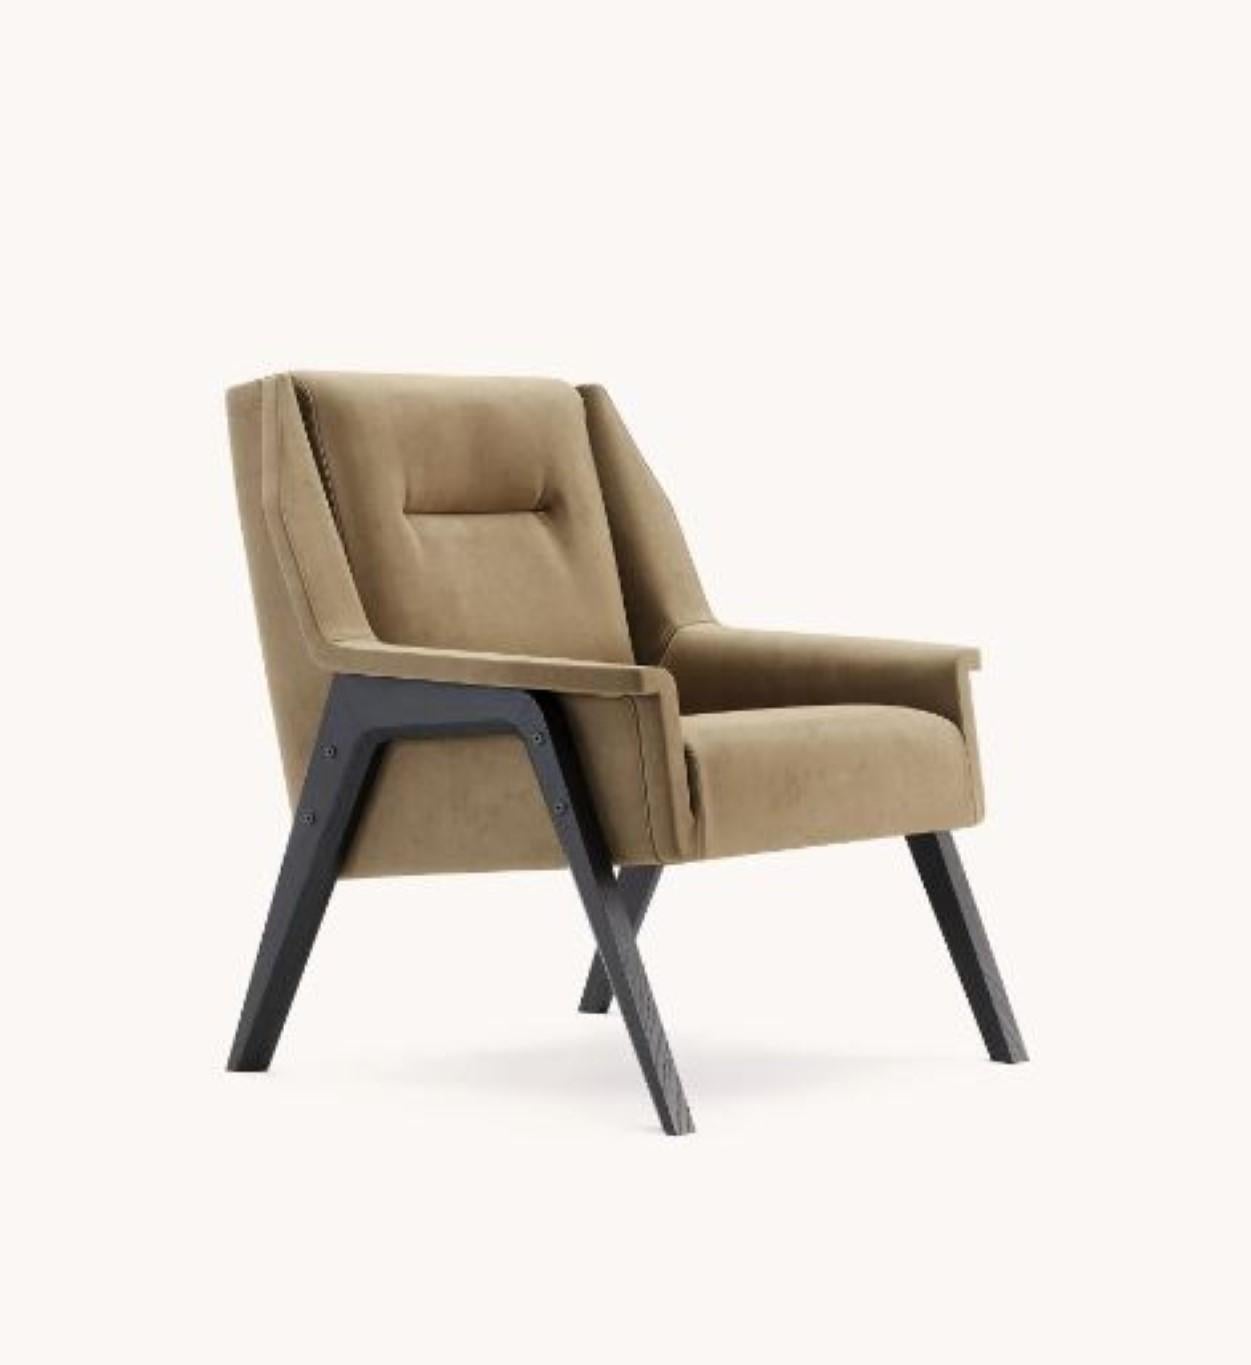 Greta armchair by Domkapa
Materials: Velvet, Black Ash.
Dimensions: W 73 x D 77 x H 85 cm. 
Also available in different materials and colors.  

Greta armchair is proof that aesthetics and ergonomics when combined, result beautifully. Available